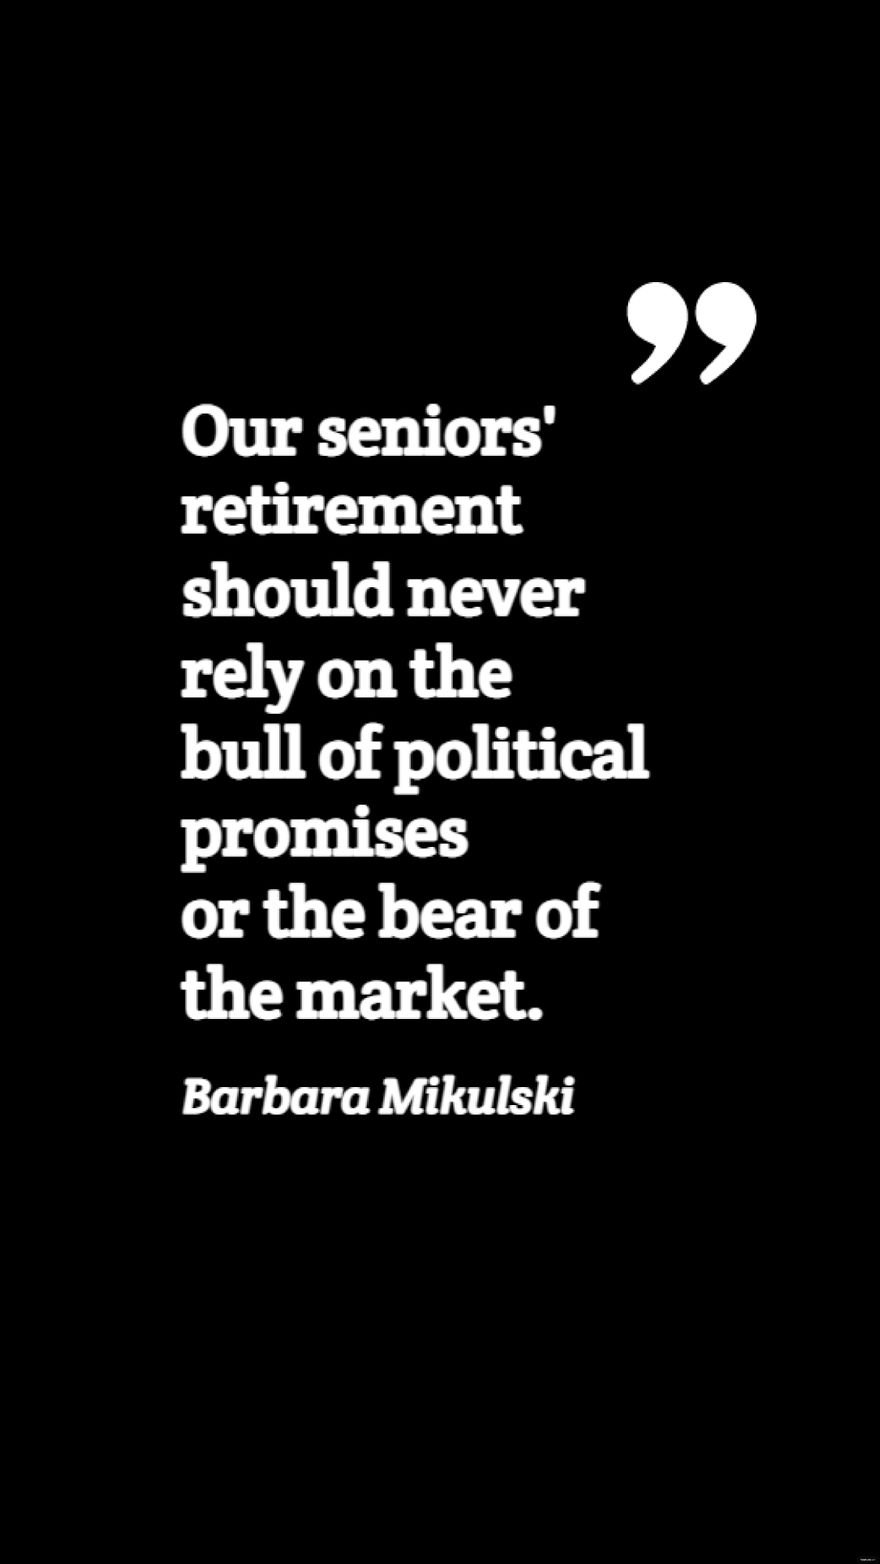 Barbara Mikulski - Our seniors' retirement should never rely on the bull of political promises or the bear of the market. in JPG